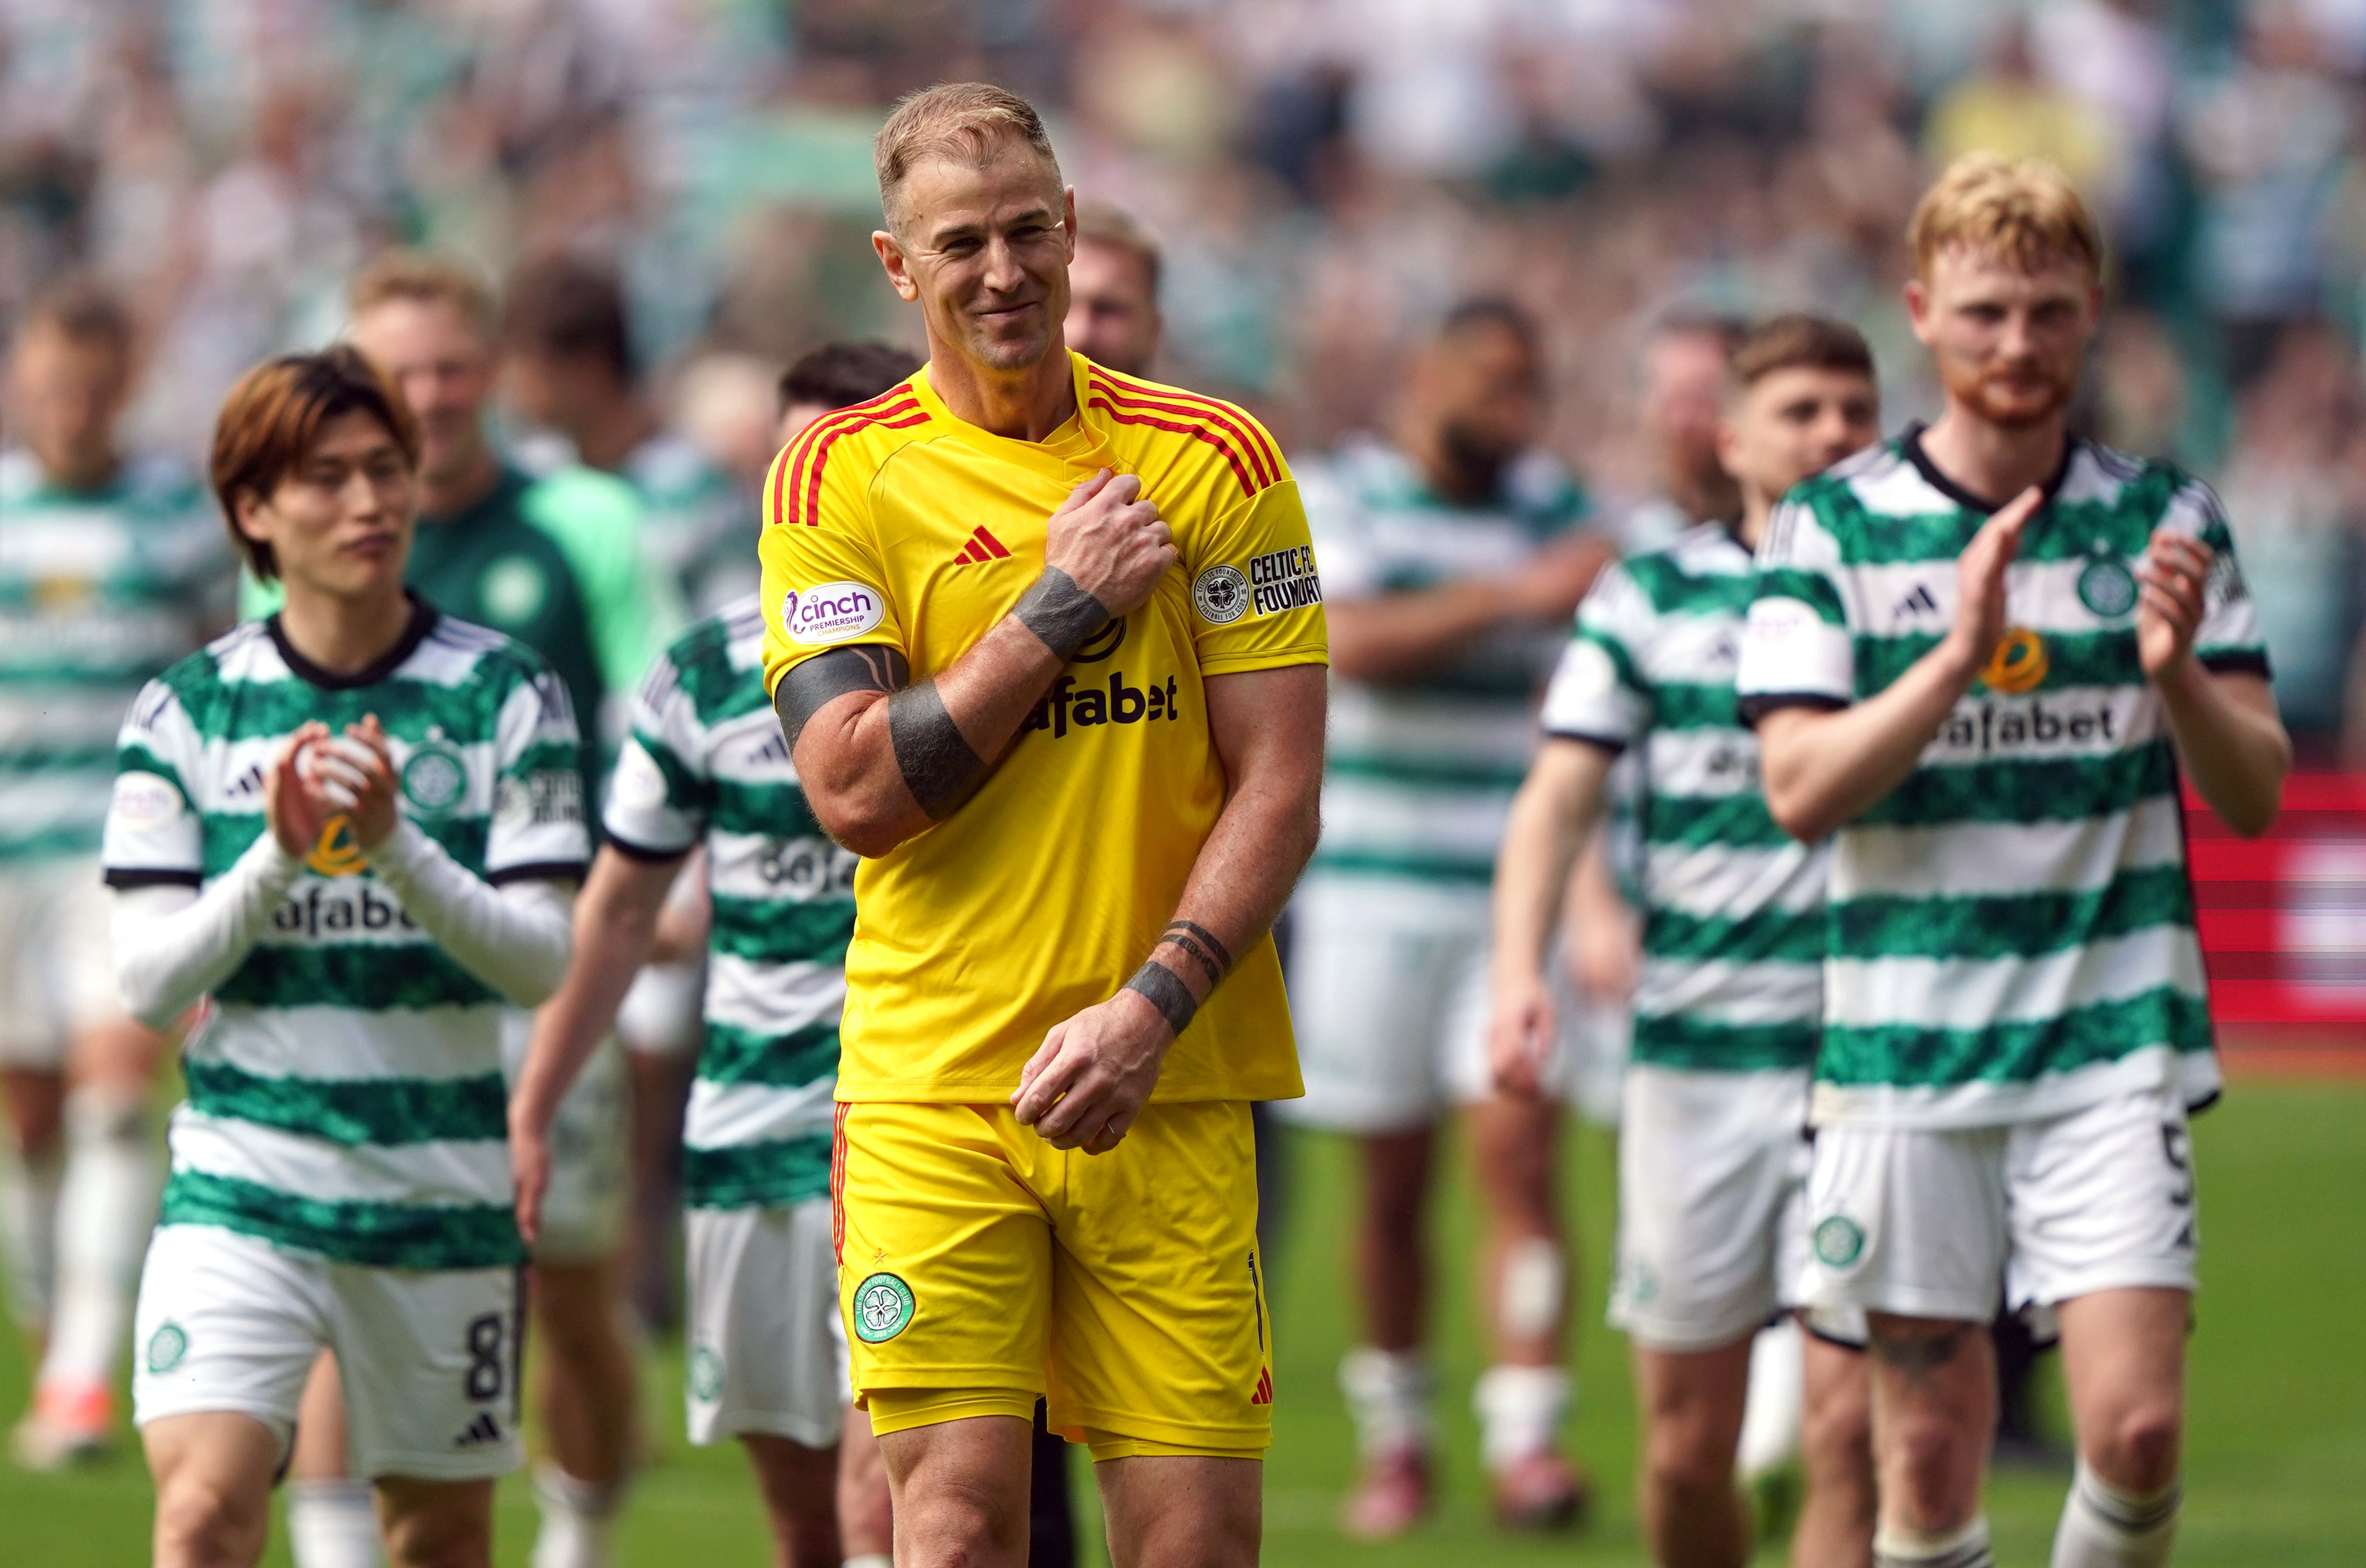 Celtic are on the brink of the Scottish Premiership title